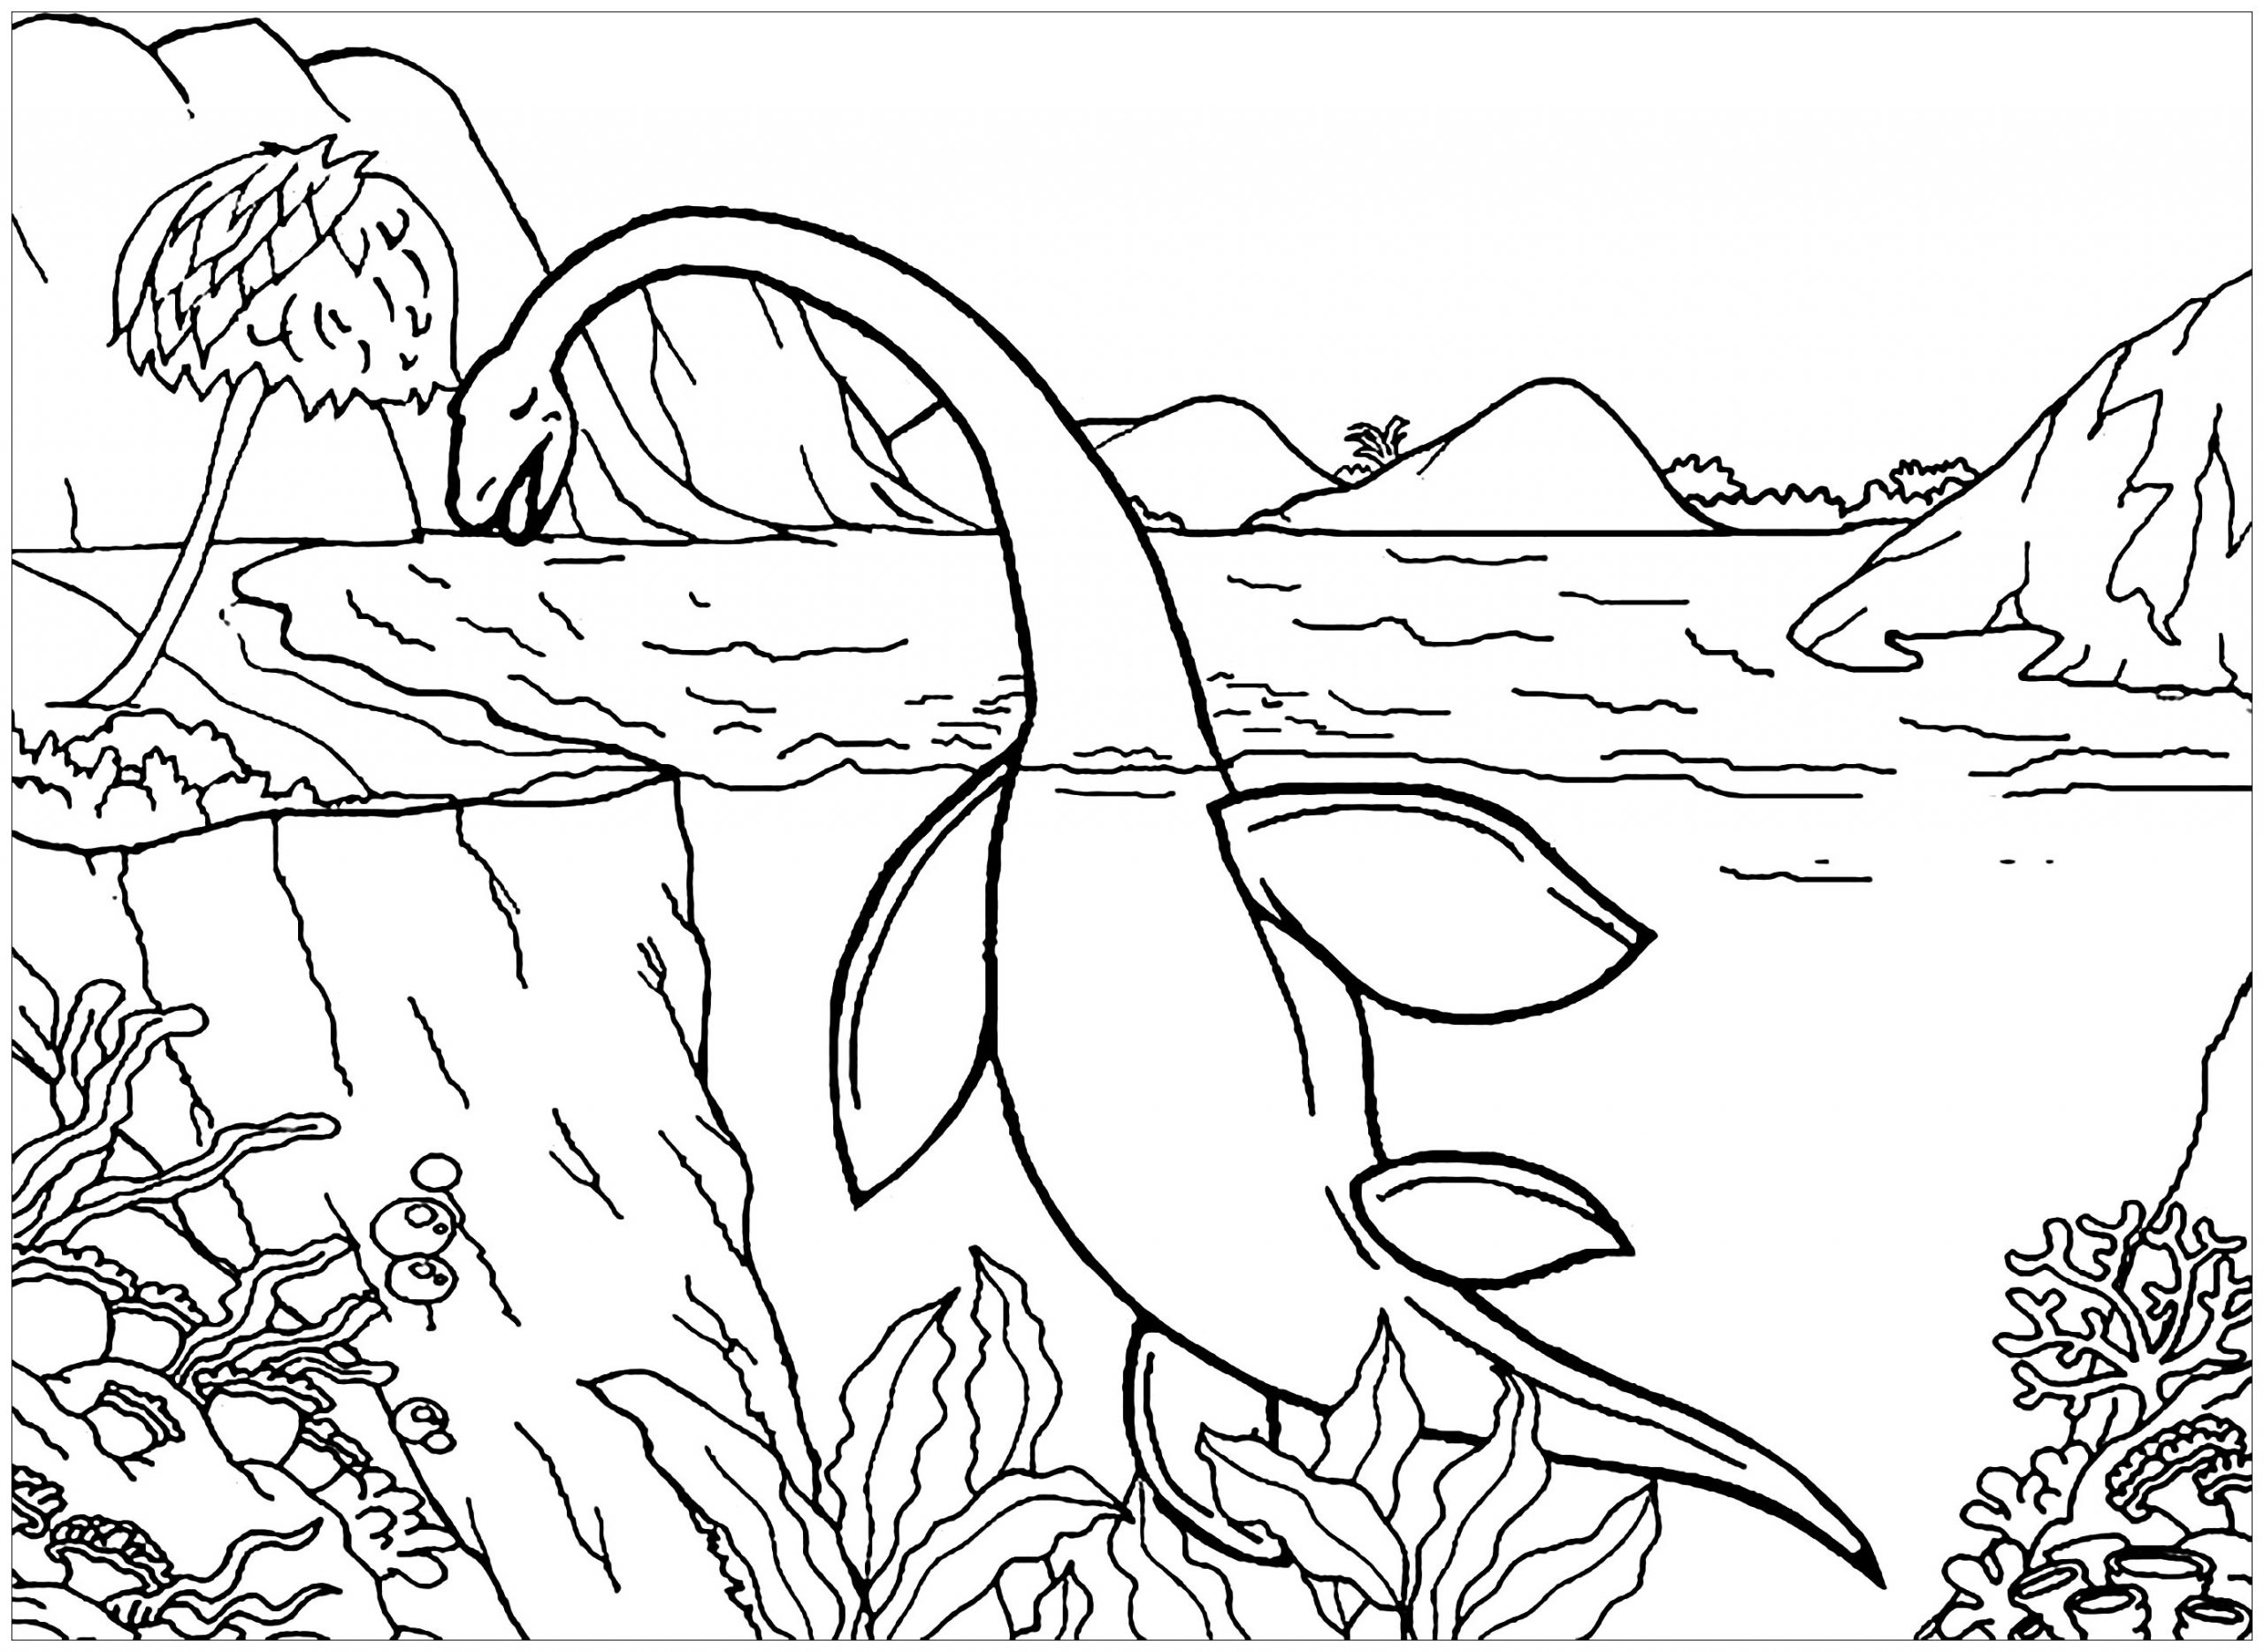 Water Living Dinosaur Coloring Pages Looks Like He is Exhausted Poor Dinosaur